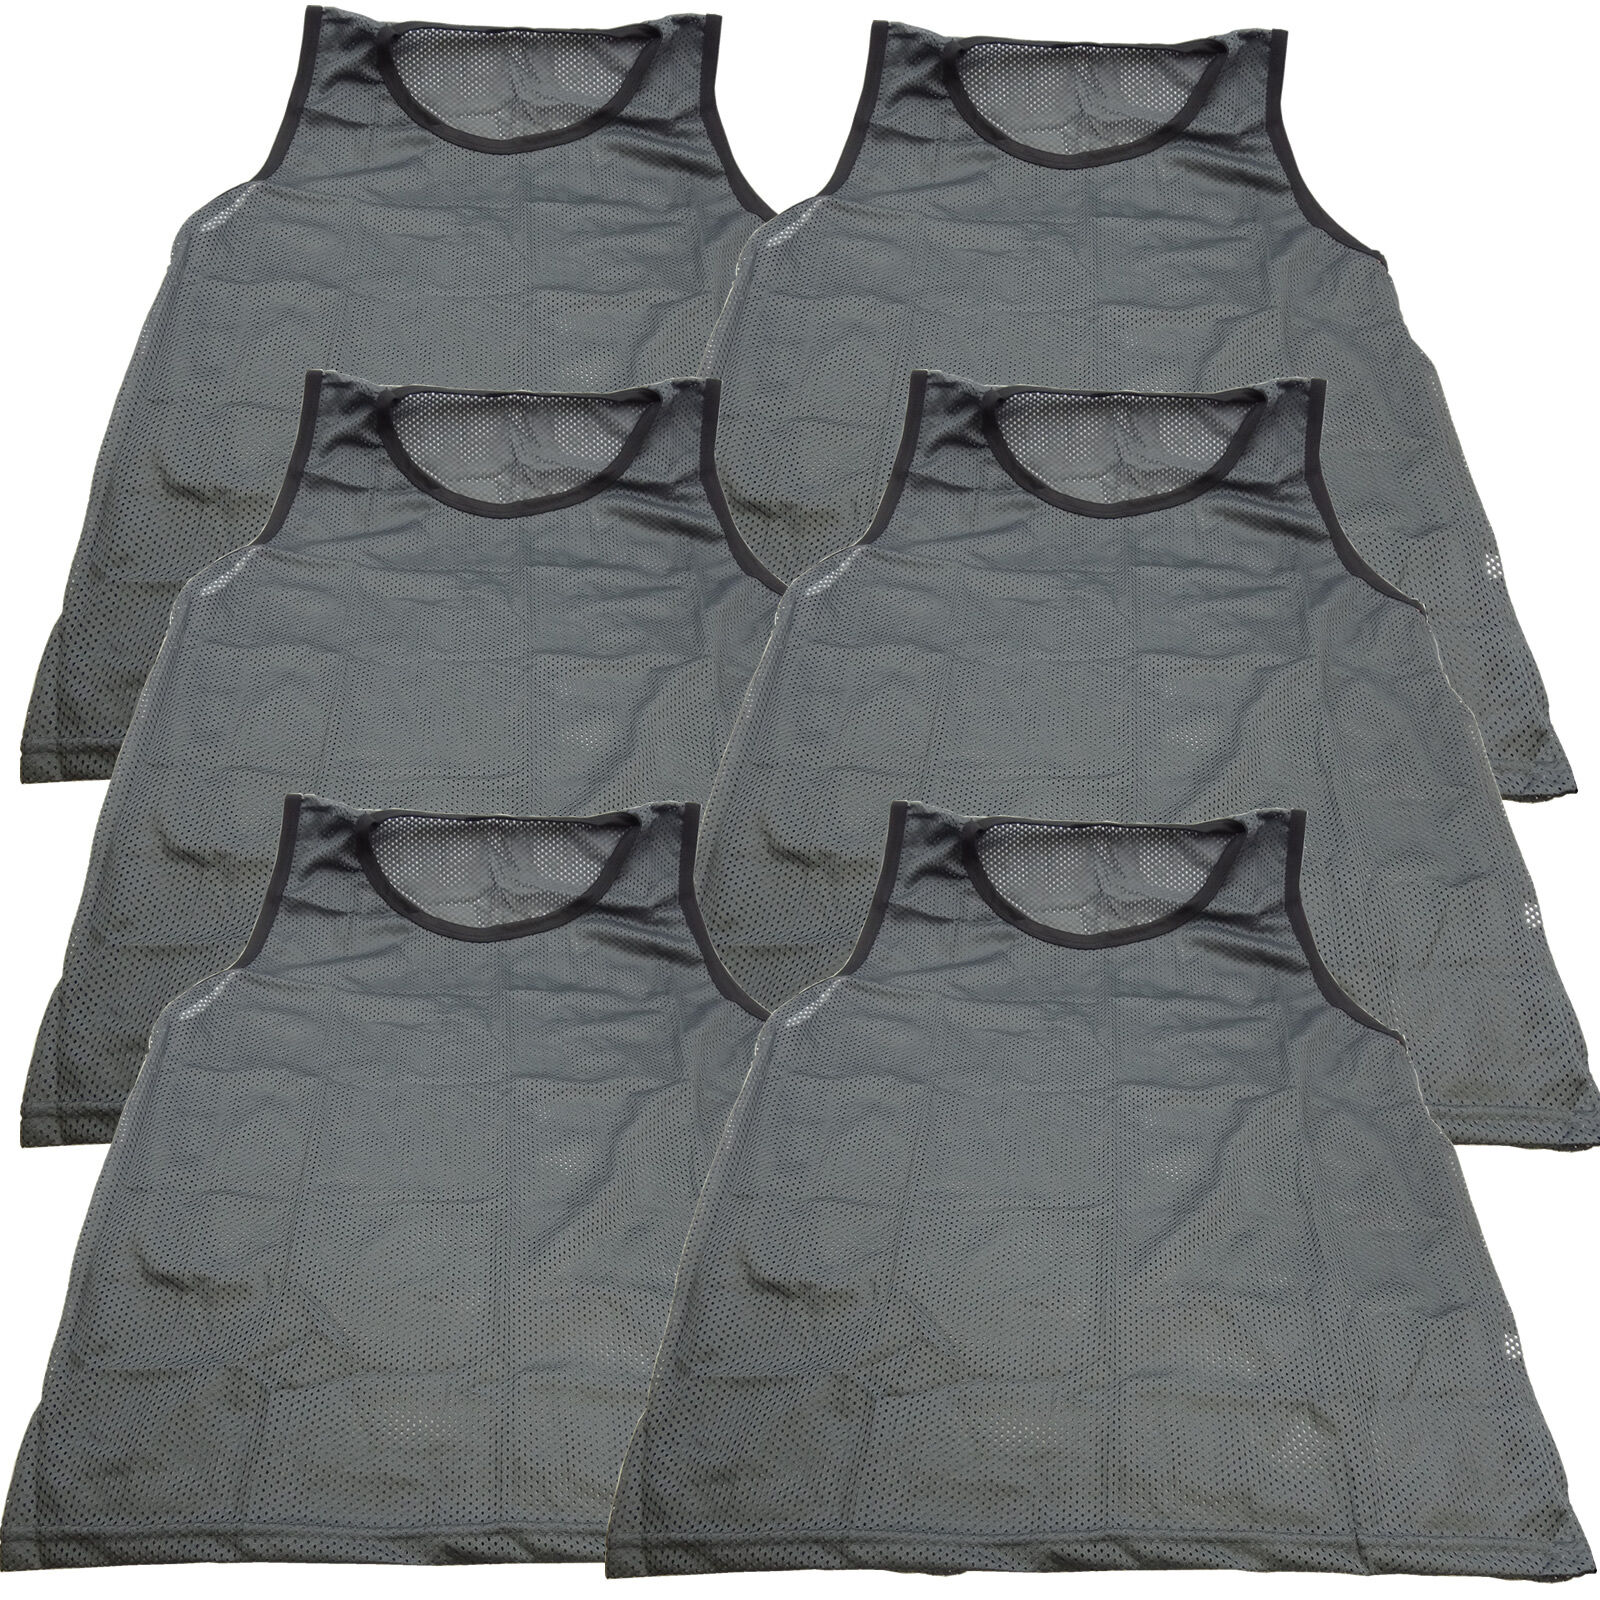 Great Choice Products 6 Pk Youth Girls Grey Scrimmage Vests Pinnies Team Sports Soccer Softball